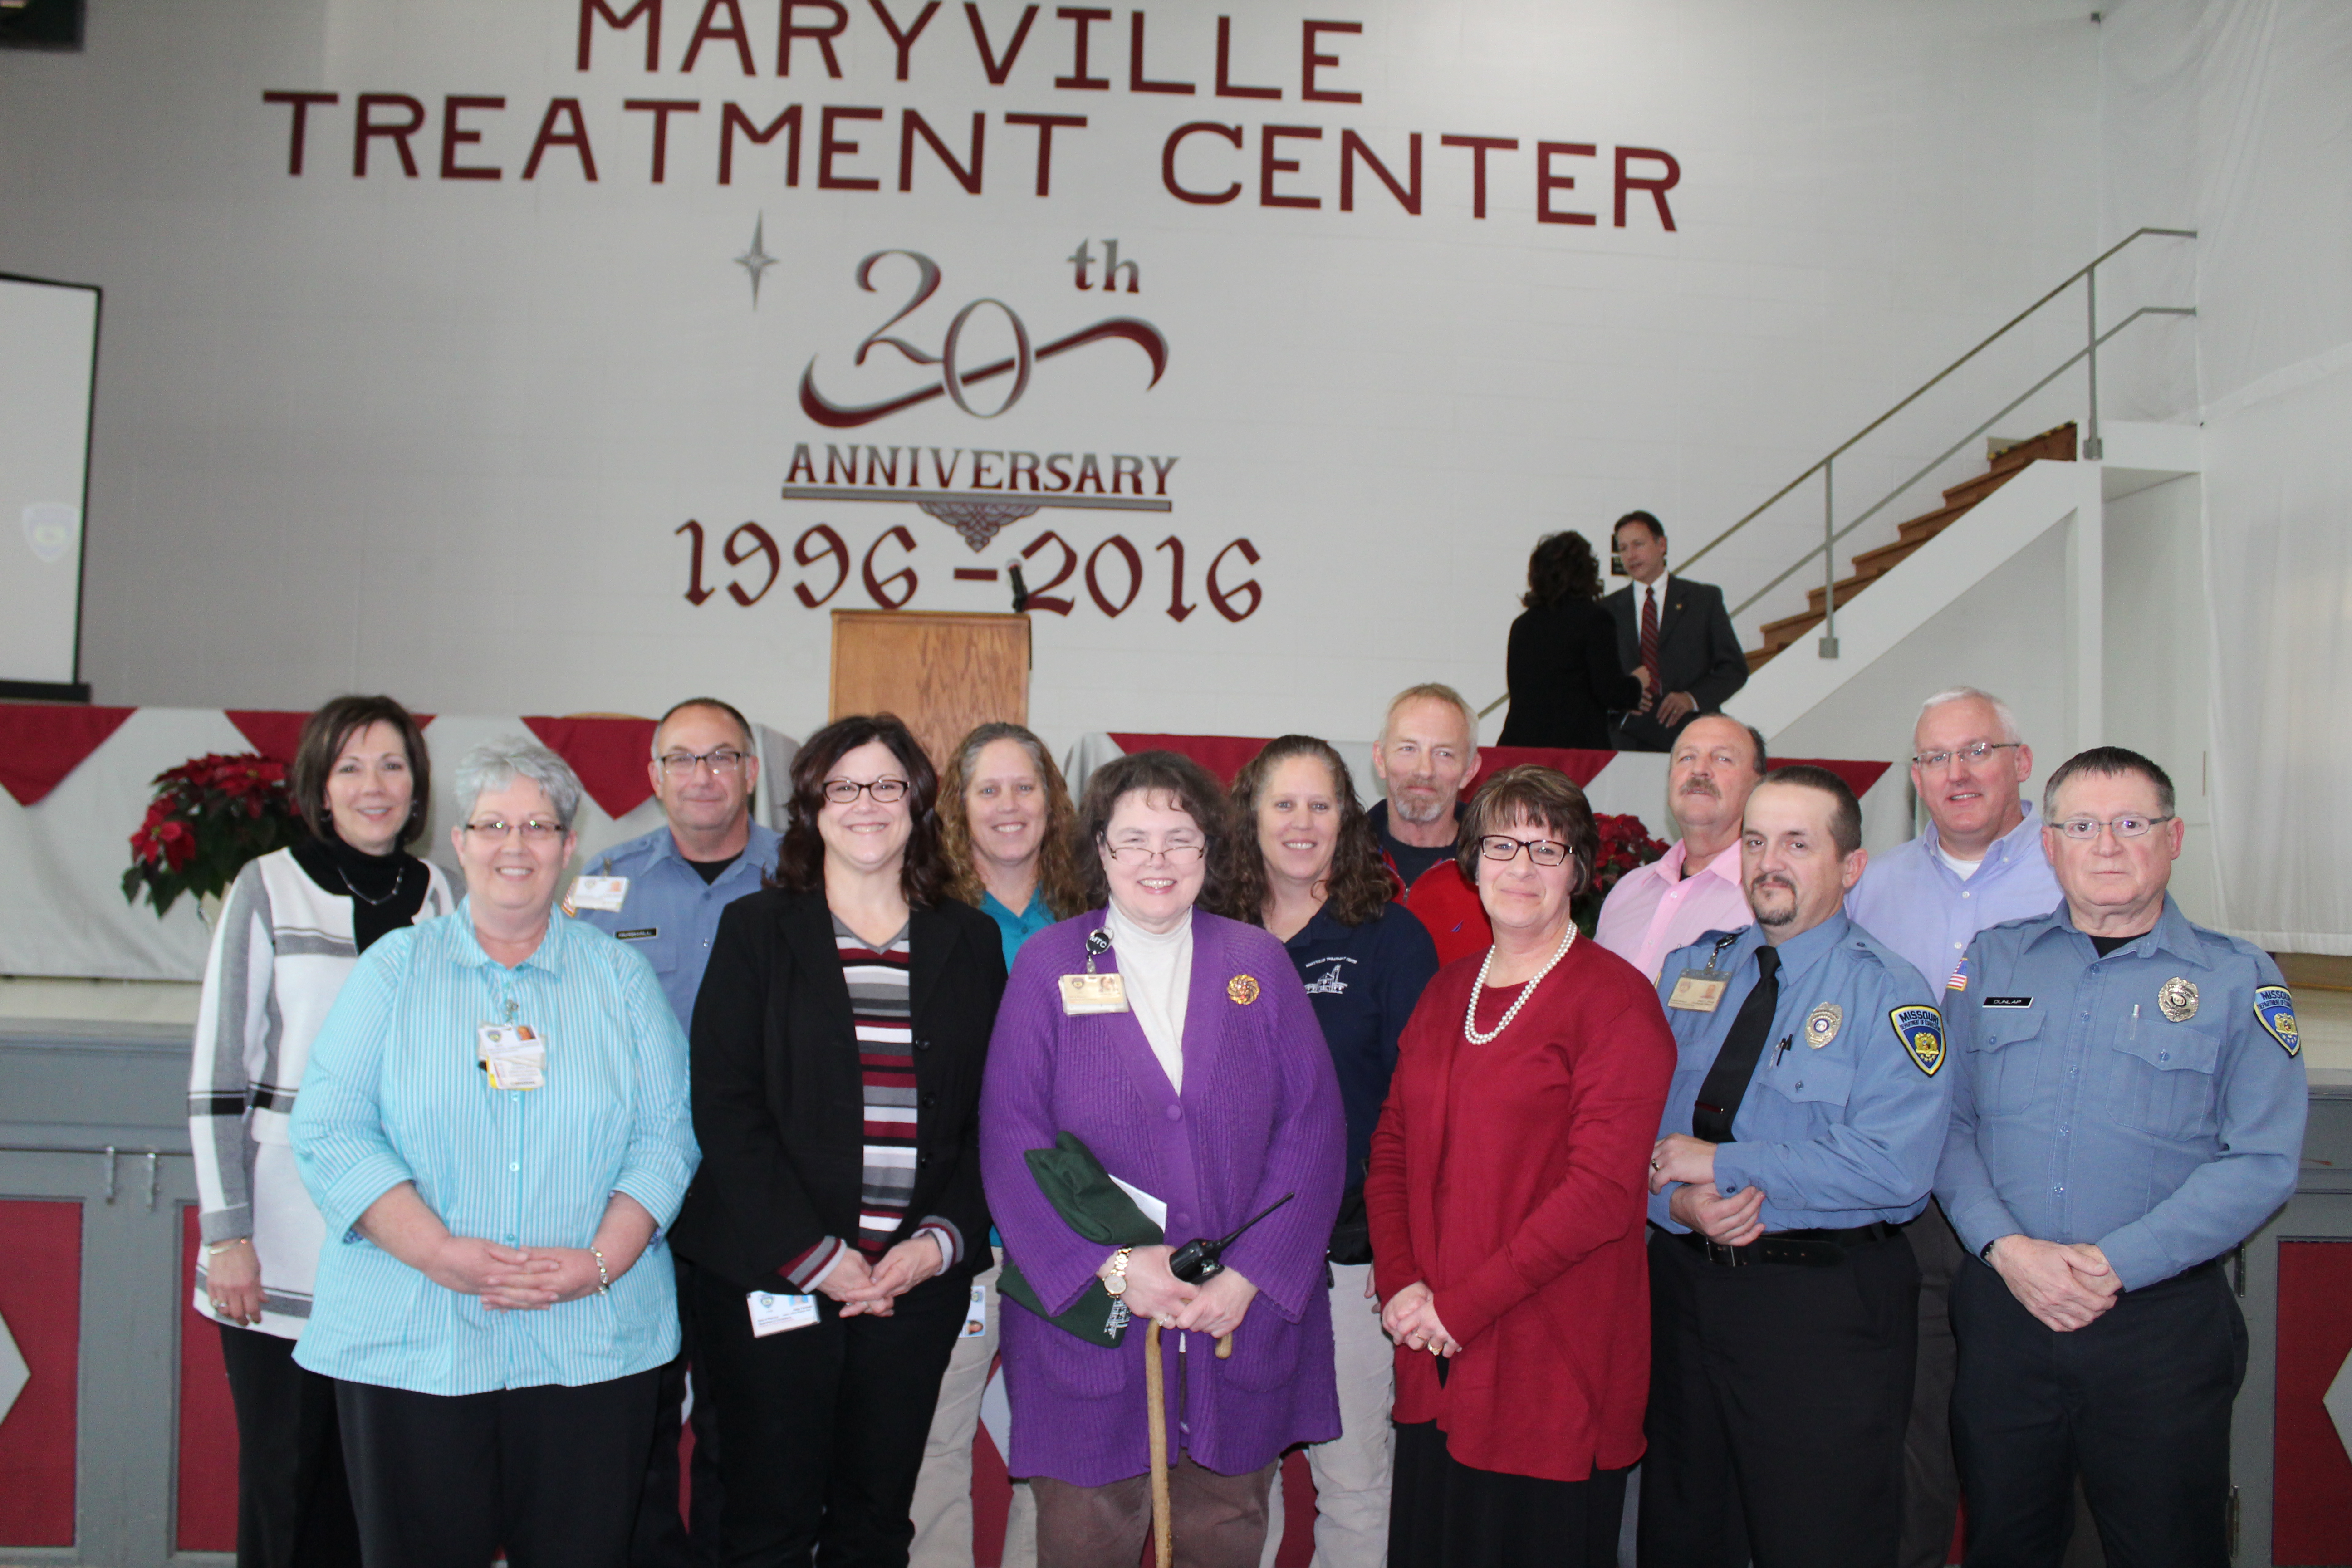 During the Maryville Treatment Center’s 20th-year celebration December 8, administrators recognized the following staff members for their 20 years of service to the facility. They are front: Judy Wonderly, Kelly Parshall, Brenda Jennings, Rhonda Steward, Jessie Privett and John Dunlap; back: Debra White, Scott Parshall, Kristy Schmitz, Amy Chor, Ralph Wallace, Tom Seipel and Kevin Shirrell. Not pictured: Sheila Sowards.